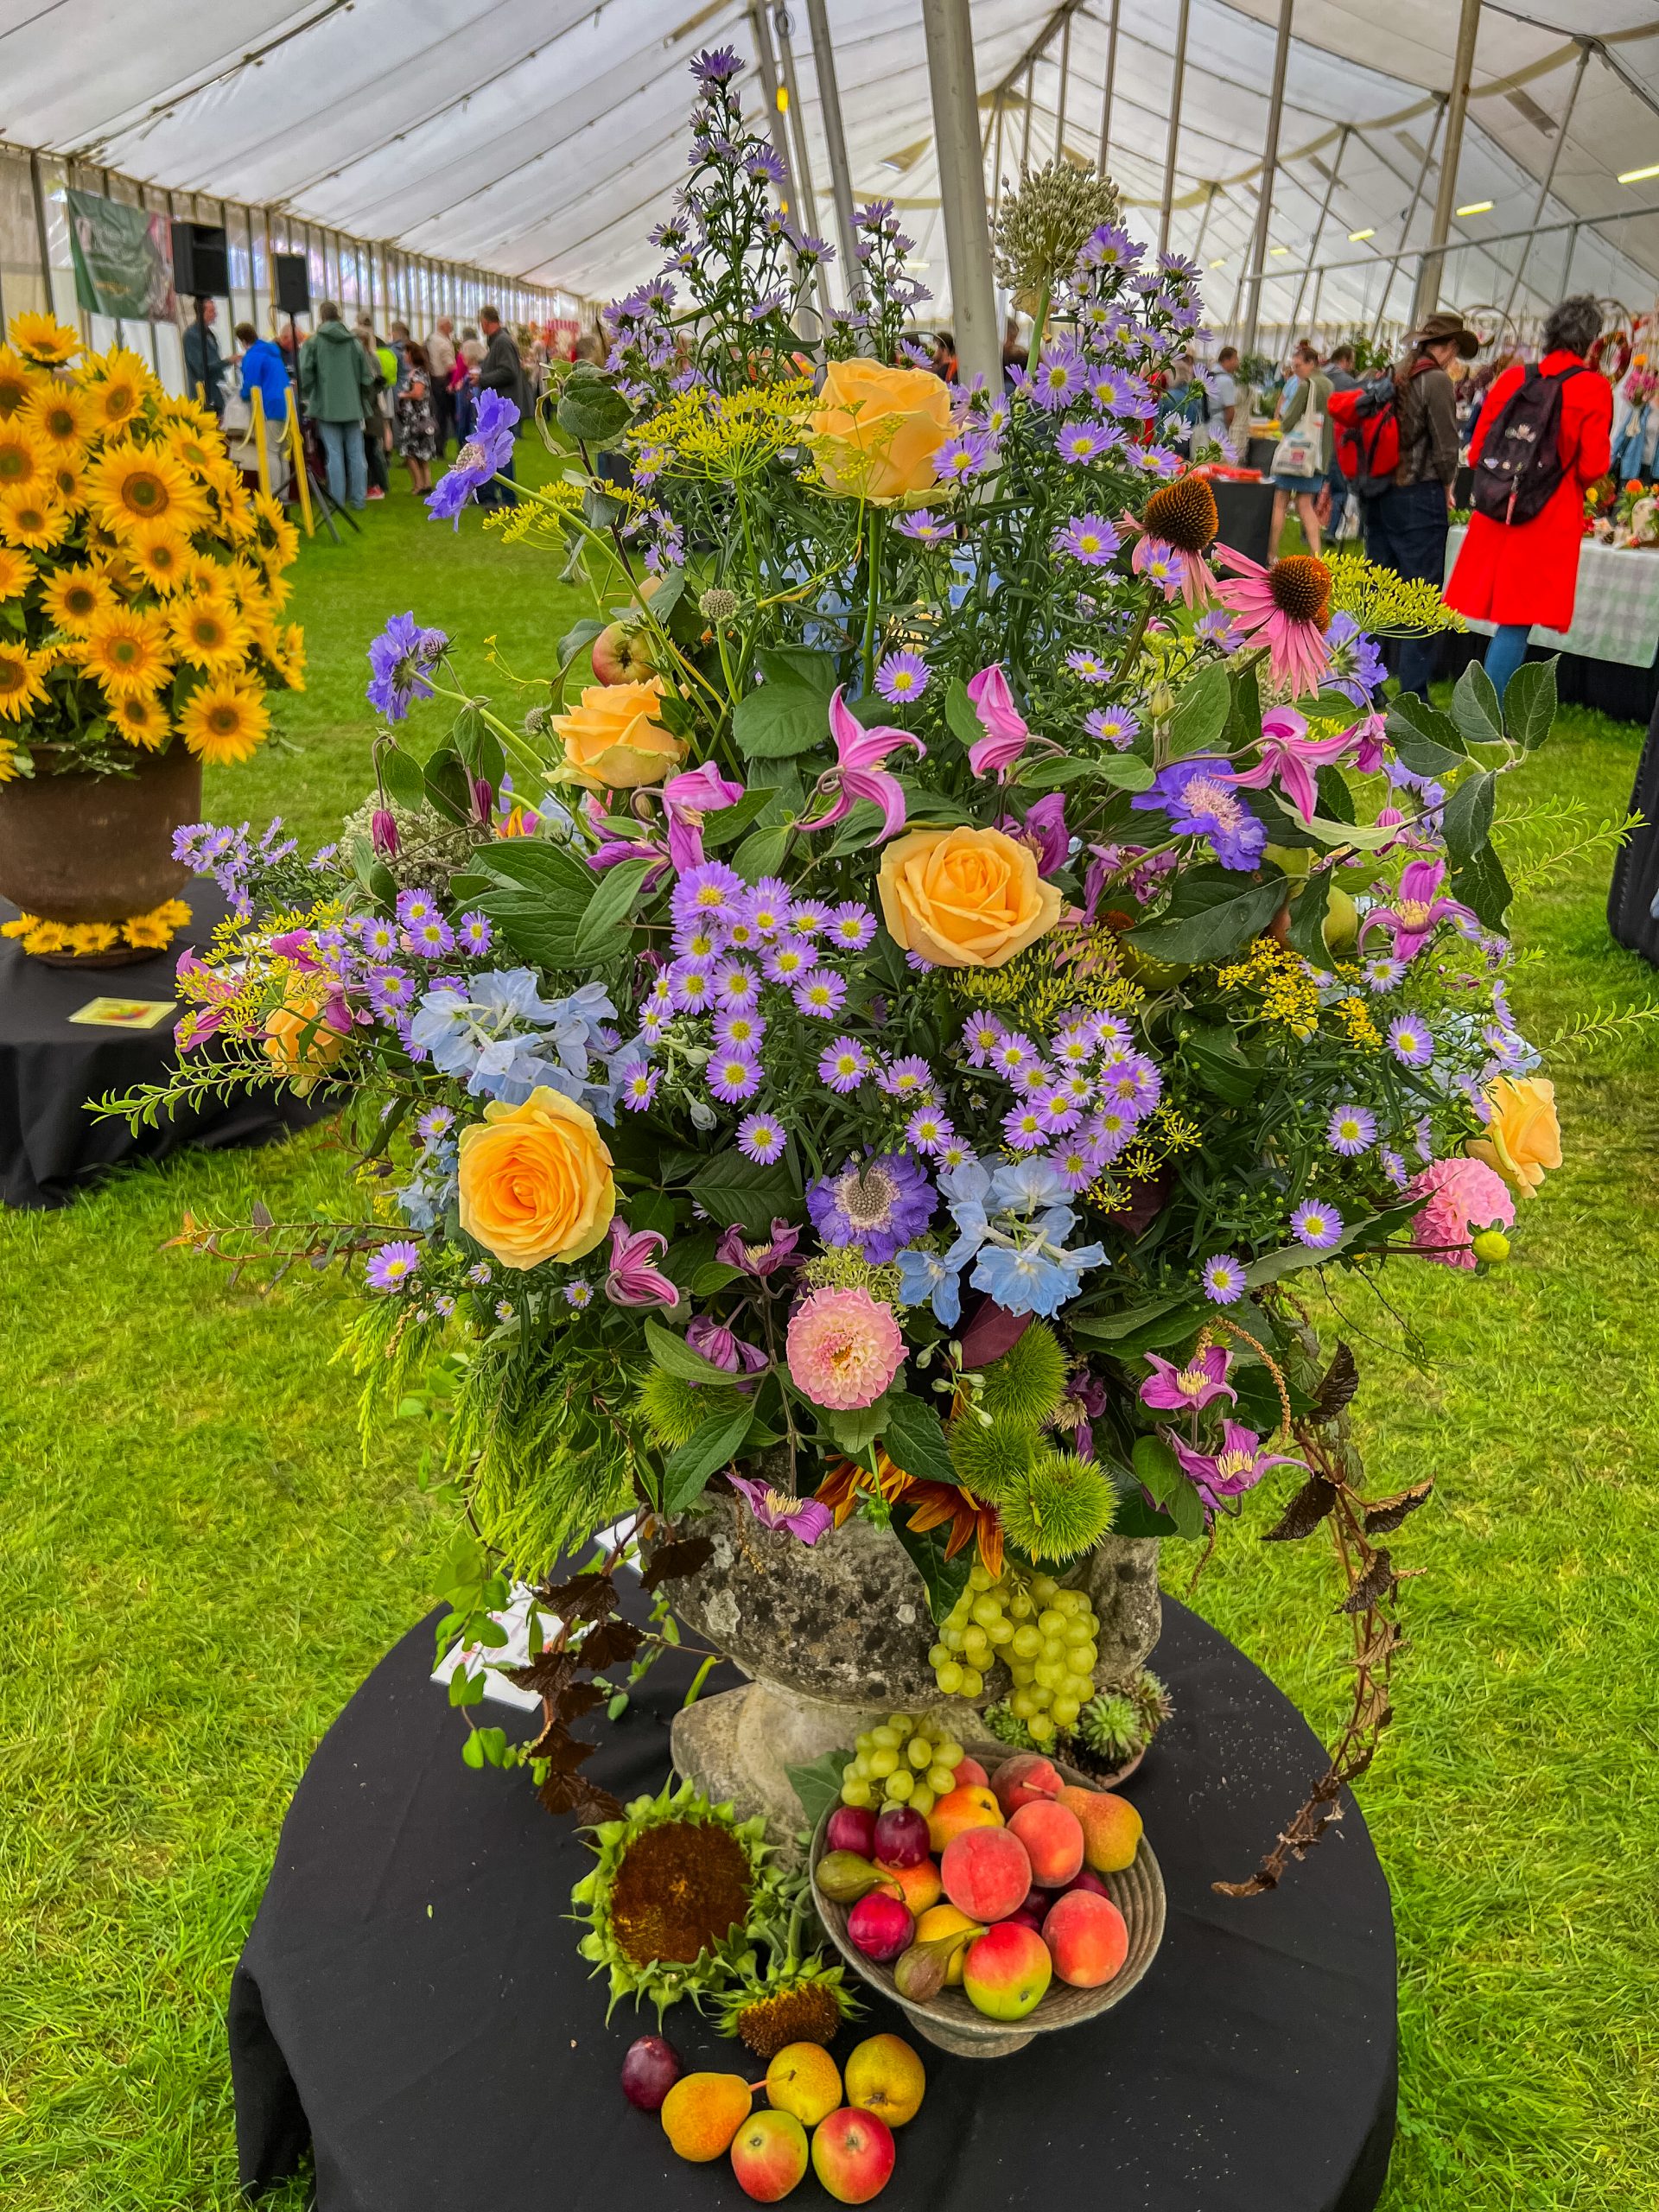 Floral Art display in the competition marquee - beautiful display of pink, yellow, blue and purple flowers and foliage